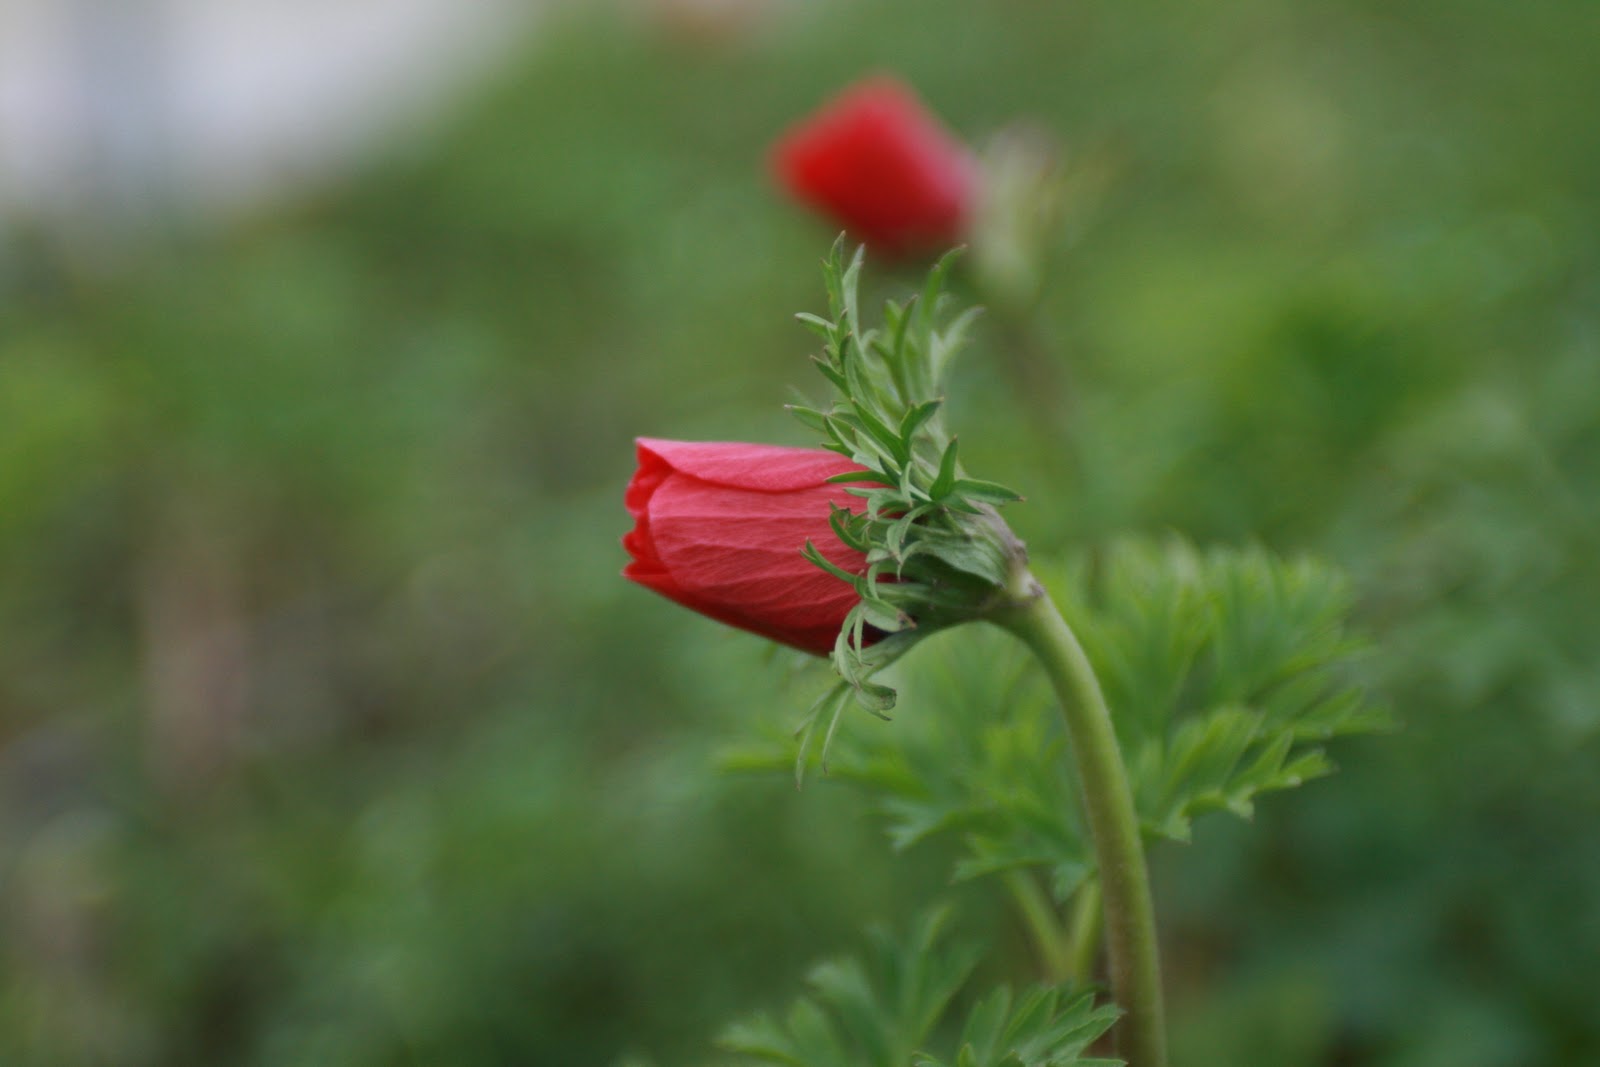 A red anemone flower